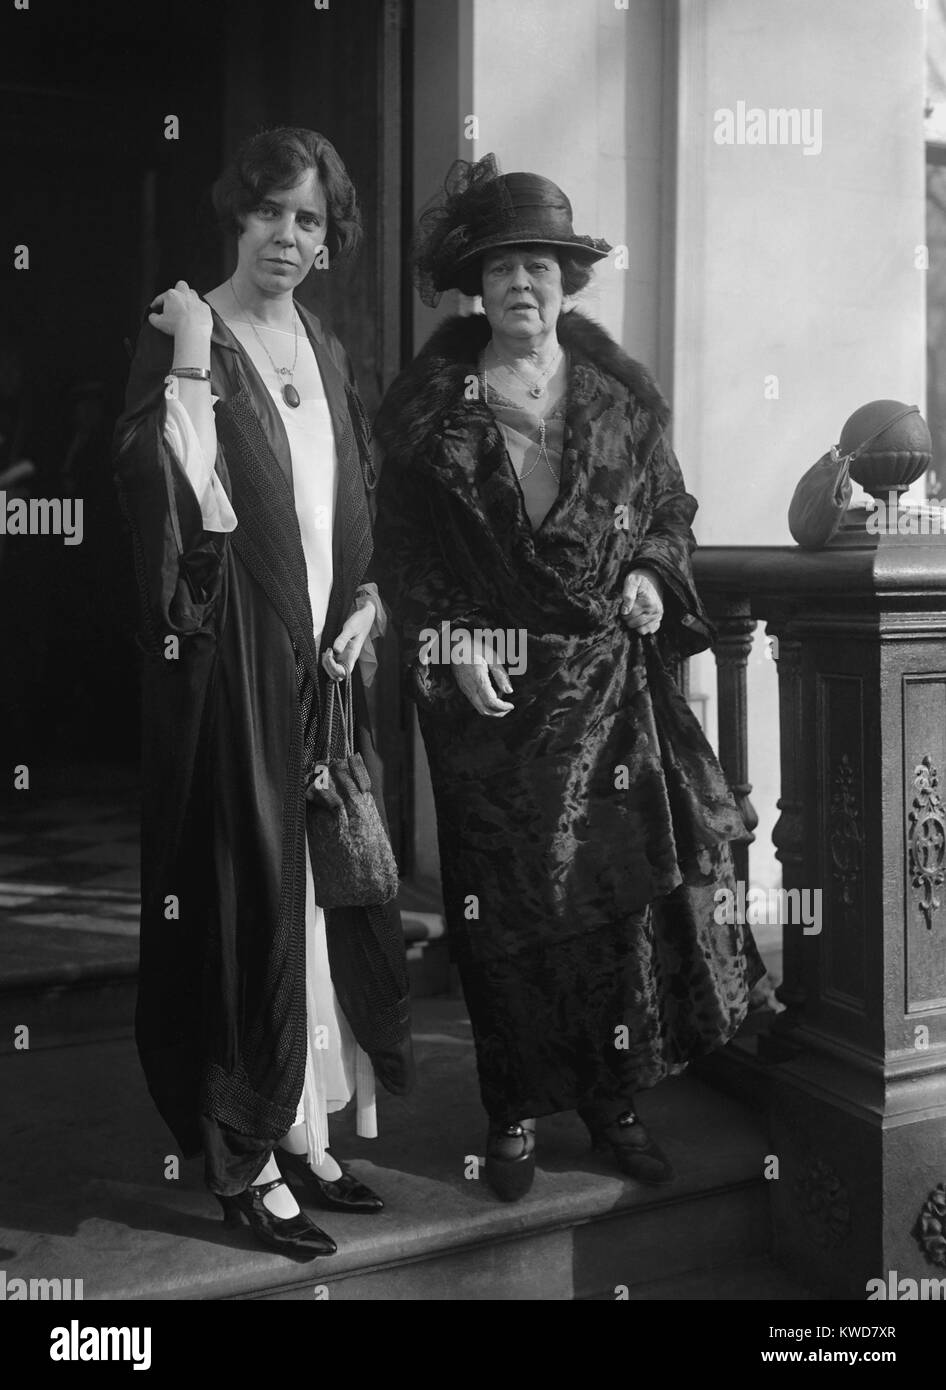 Alice Paul and Alva Vanderbilt Belmont in Washington, D.C. Nov. 17, 1923. Belmont was President of the National Woman's Party and a major benefactor the NWP. Paul was a top leader in the NWP and the author of a proposed Equal Rights Amendment in 1923. (BSLOC 2015 16 203) Stock Photo